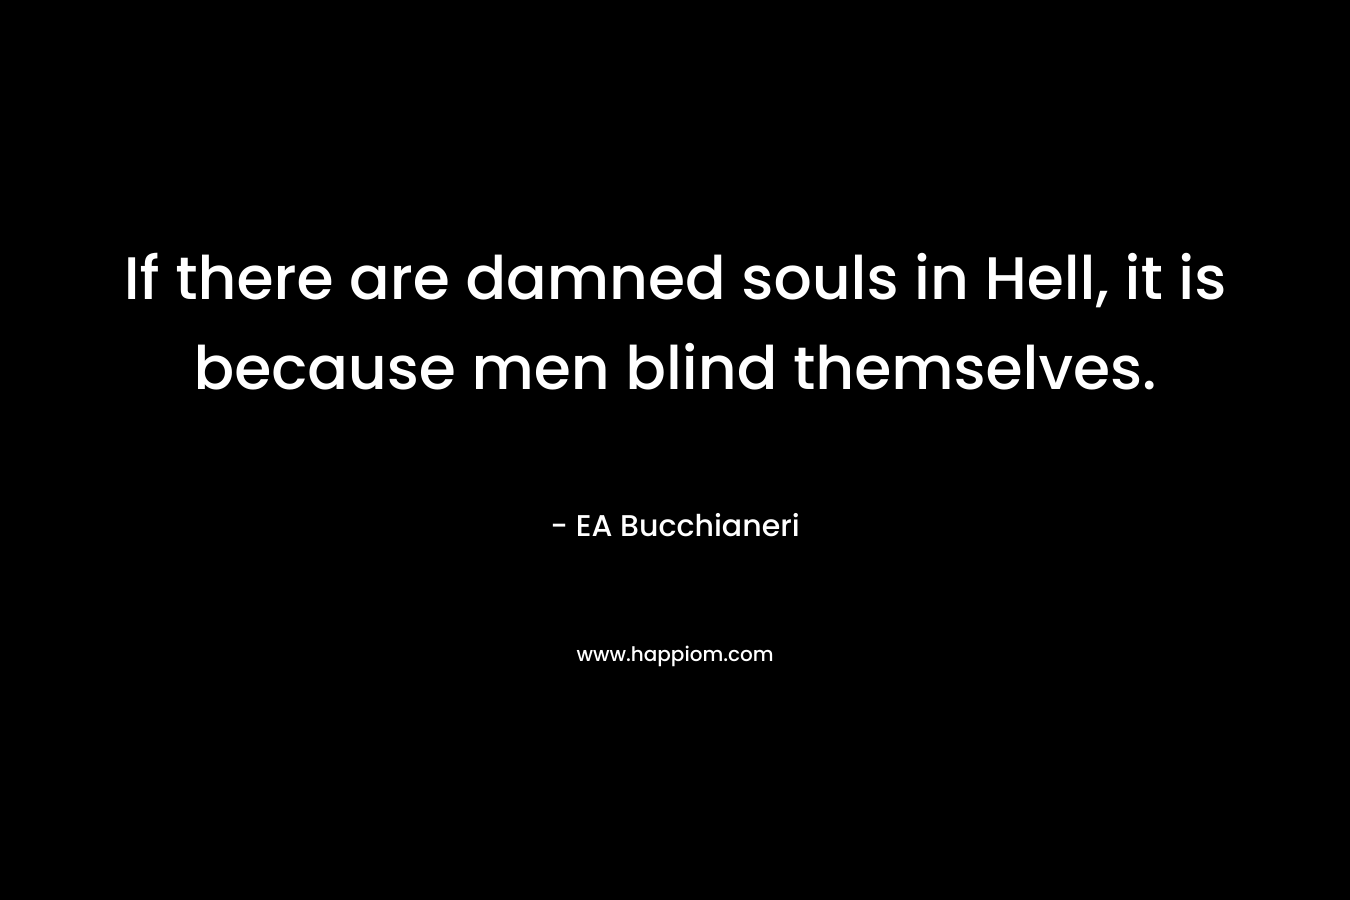 If there are damned souls in Hell, it is because men blind themselves.